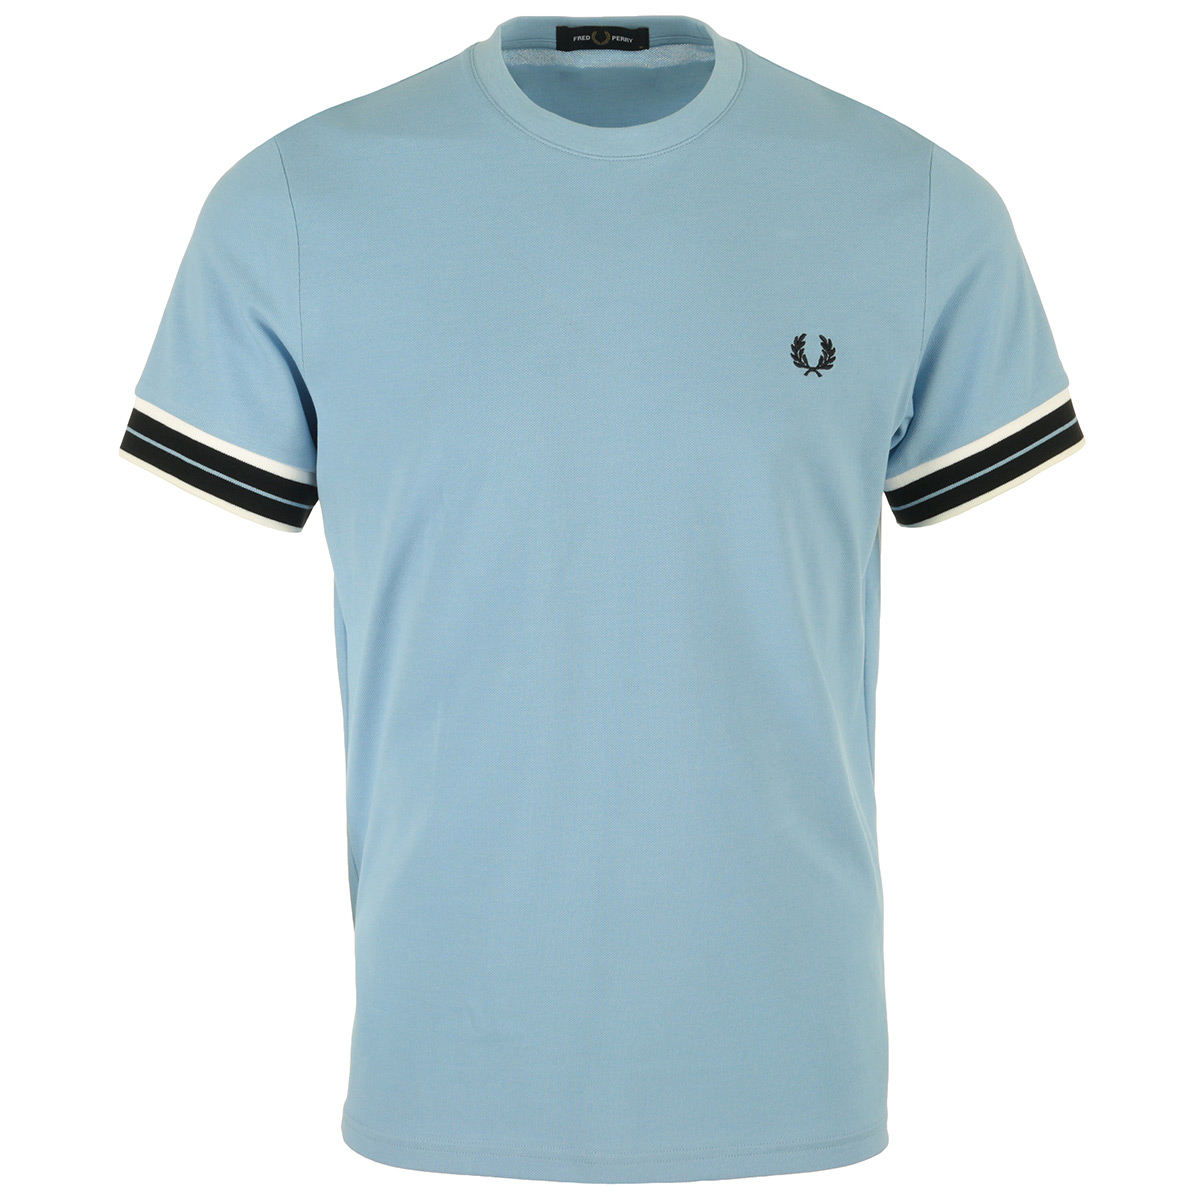 Fred Perry "Tramline Tipped Pique T-Shirt"